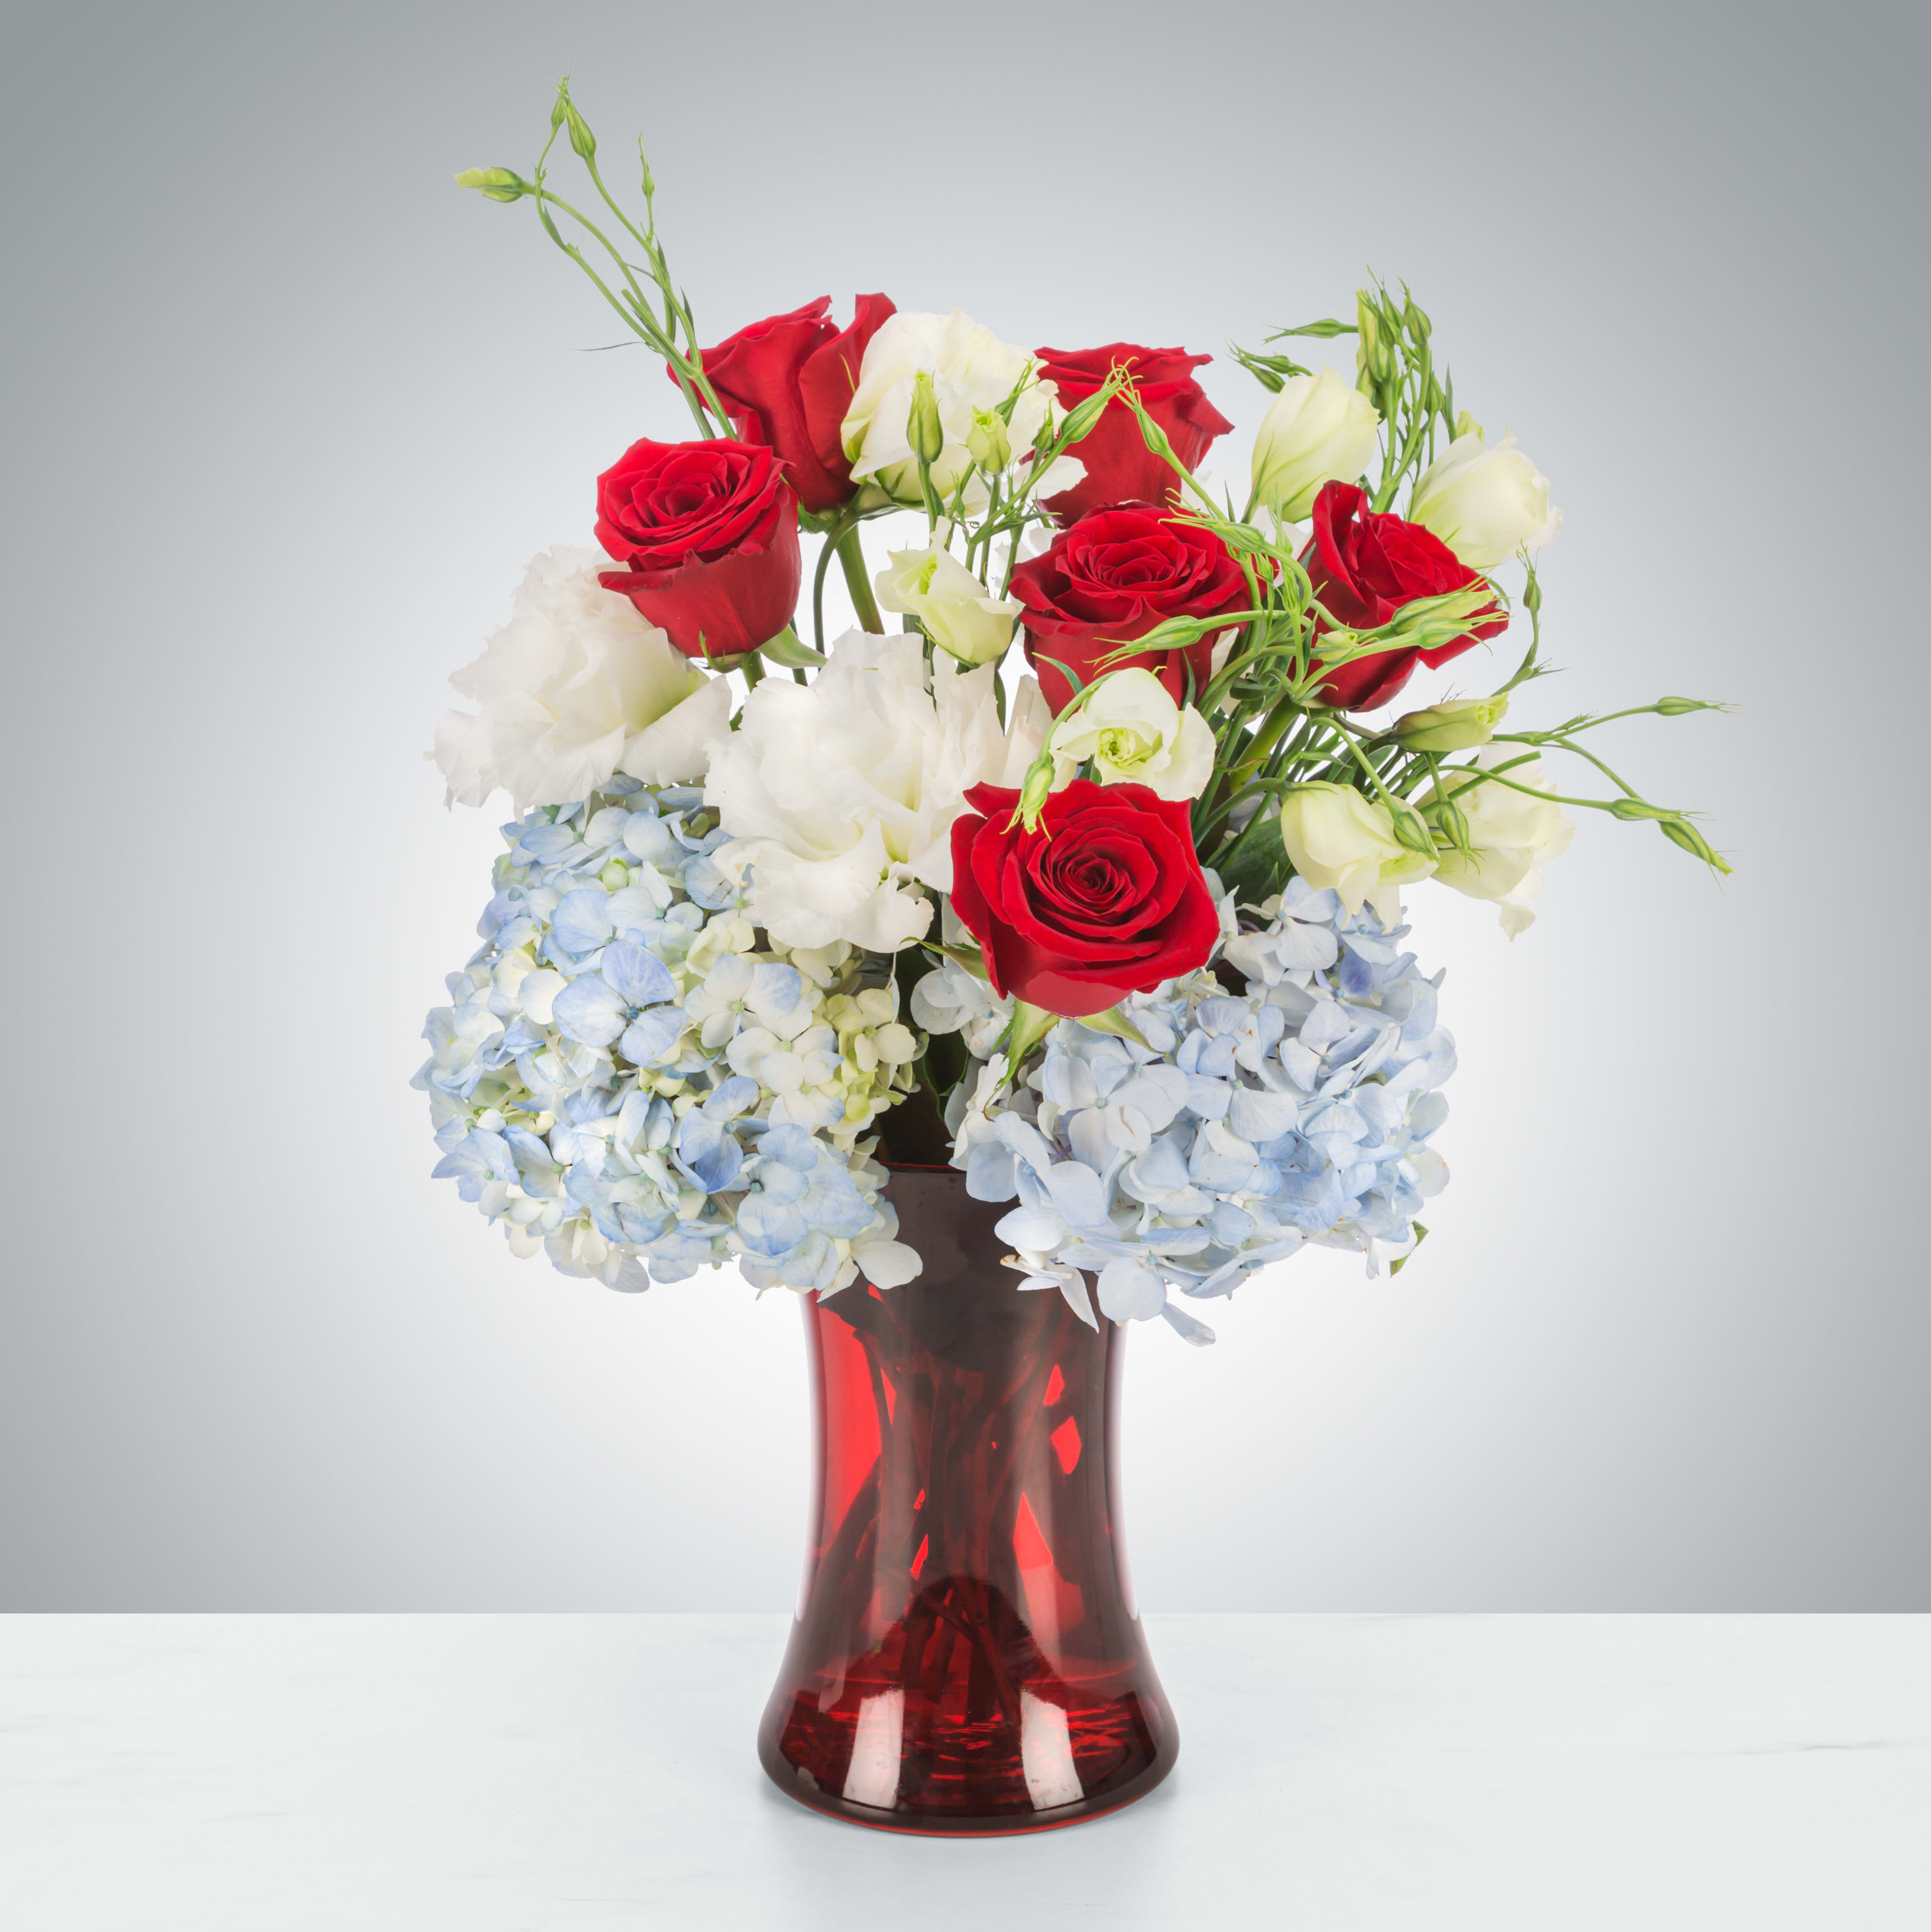 Americana  - Celebrate America with this red, white, and blue arrangement. Perfect for sending as a thank you gift for a Fourth of July cookout or sending on Memorial Day.  Approximate Dimensions: 11&quot;D x 16&quot;H